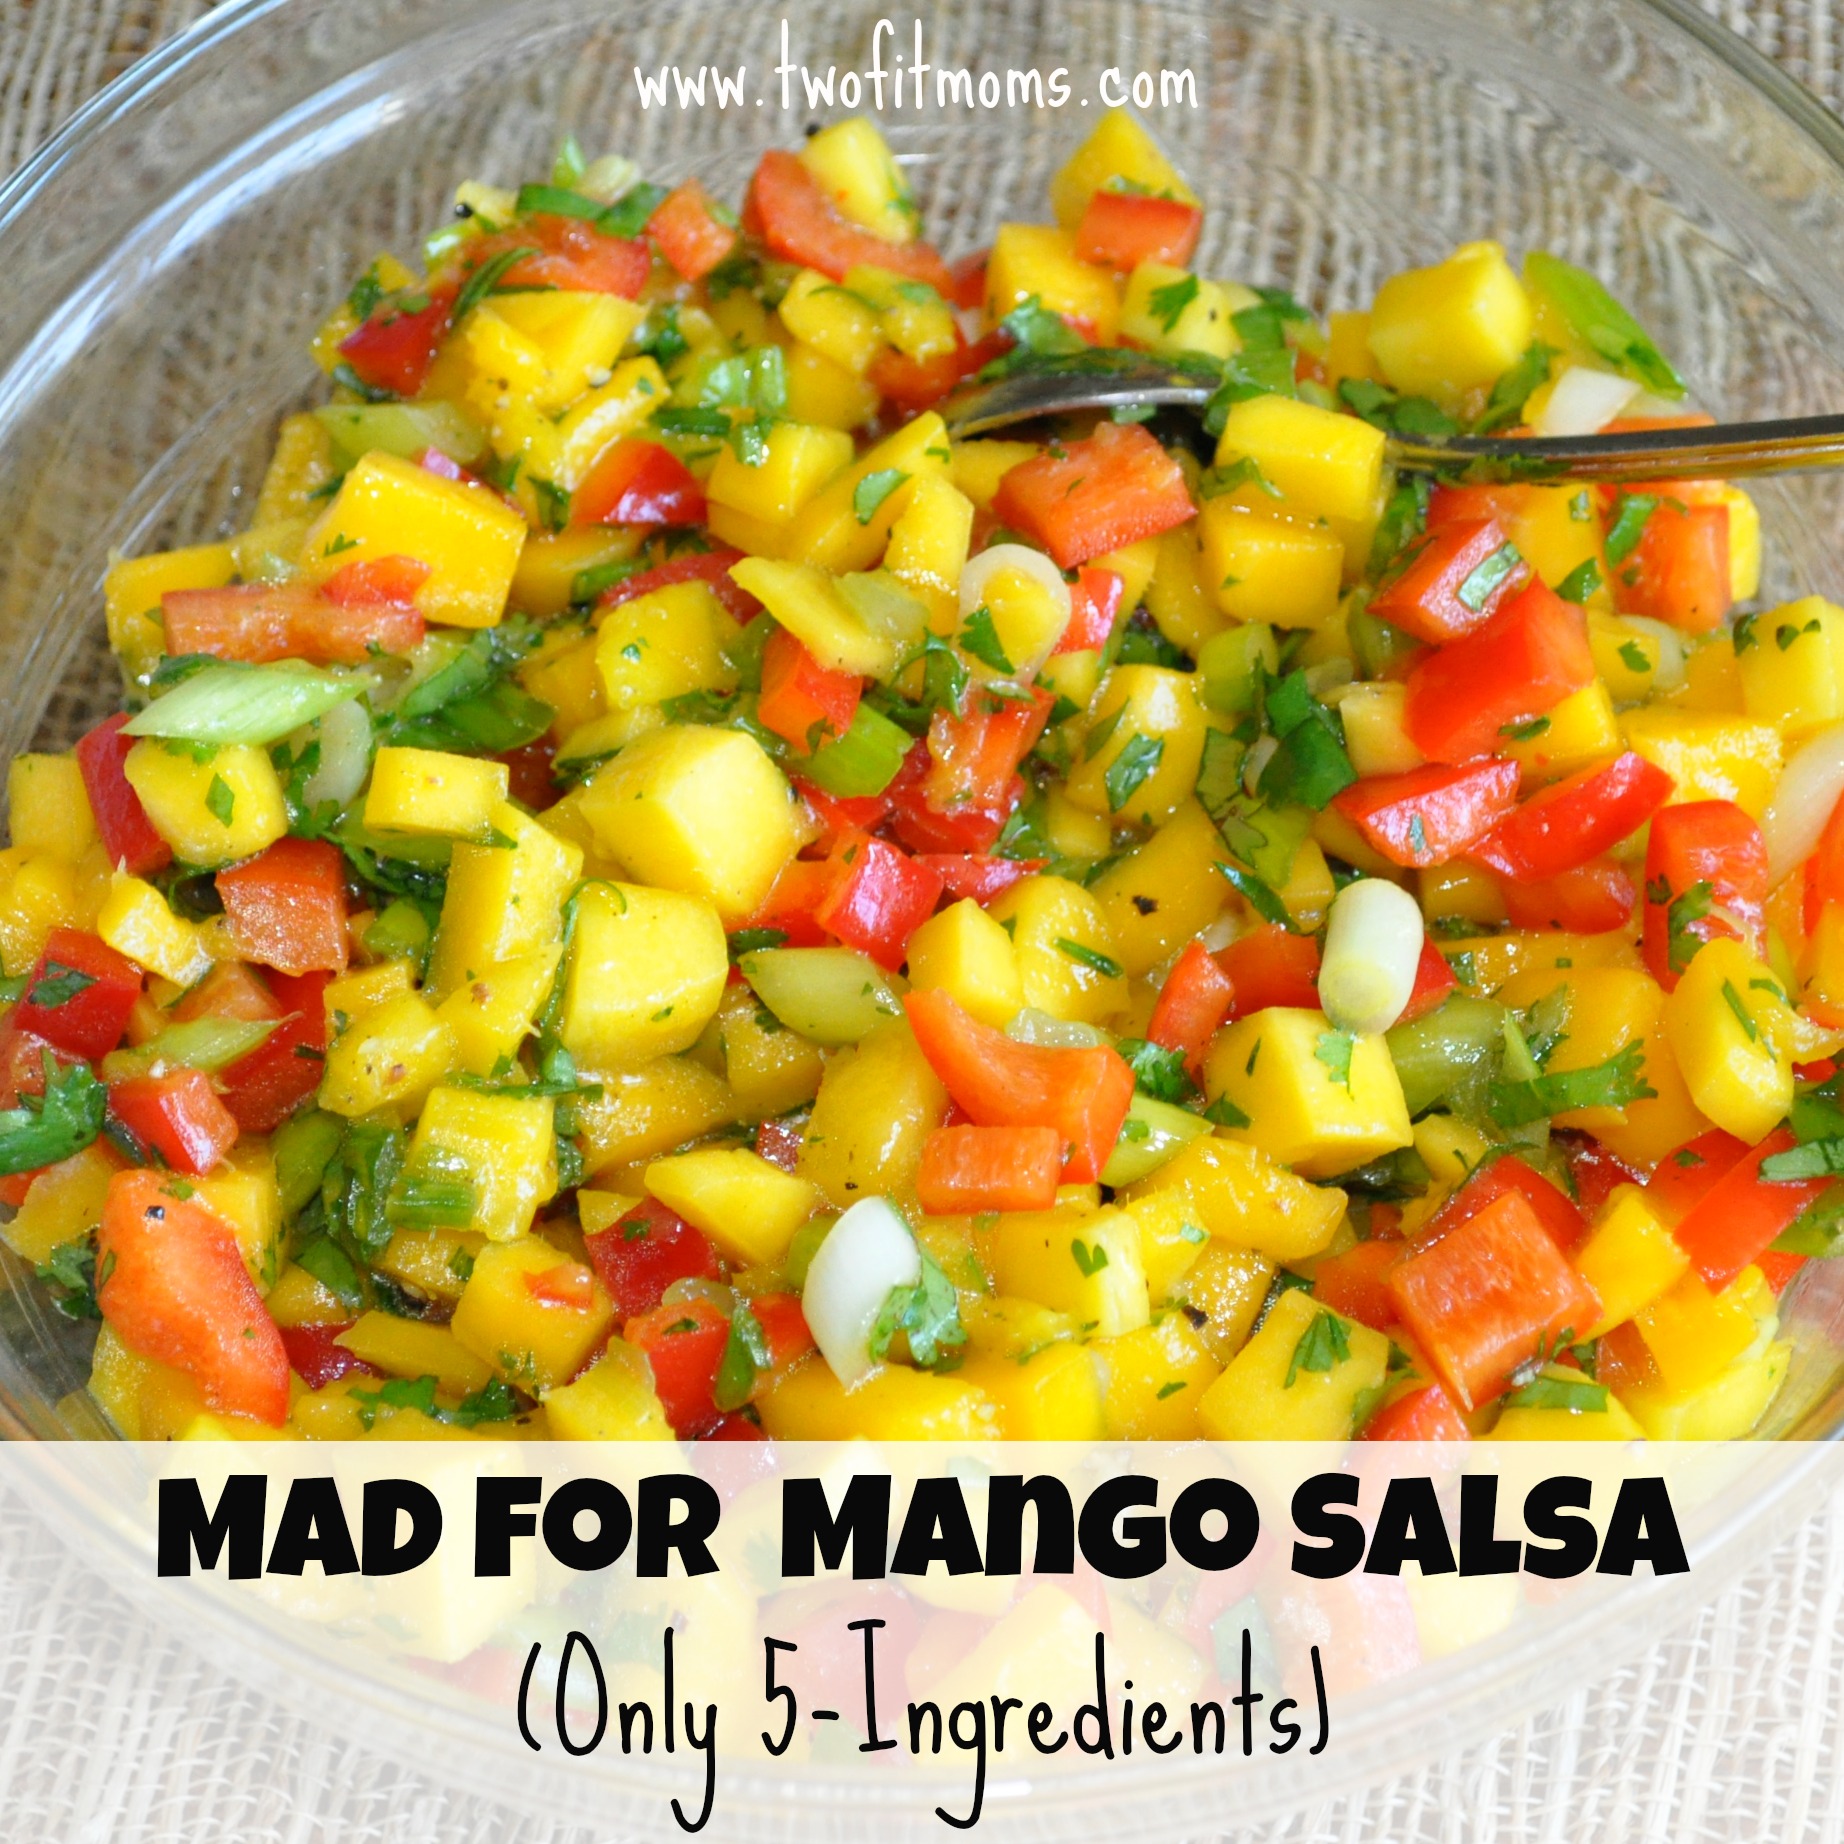 Two Fit Moms » Mad for Mango Salsa